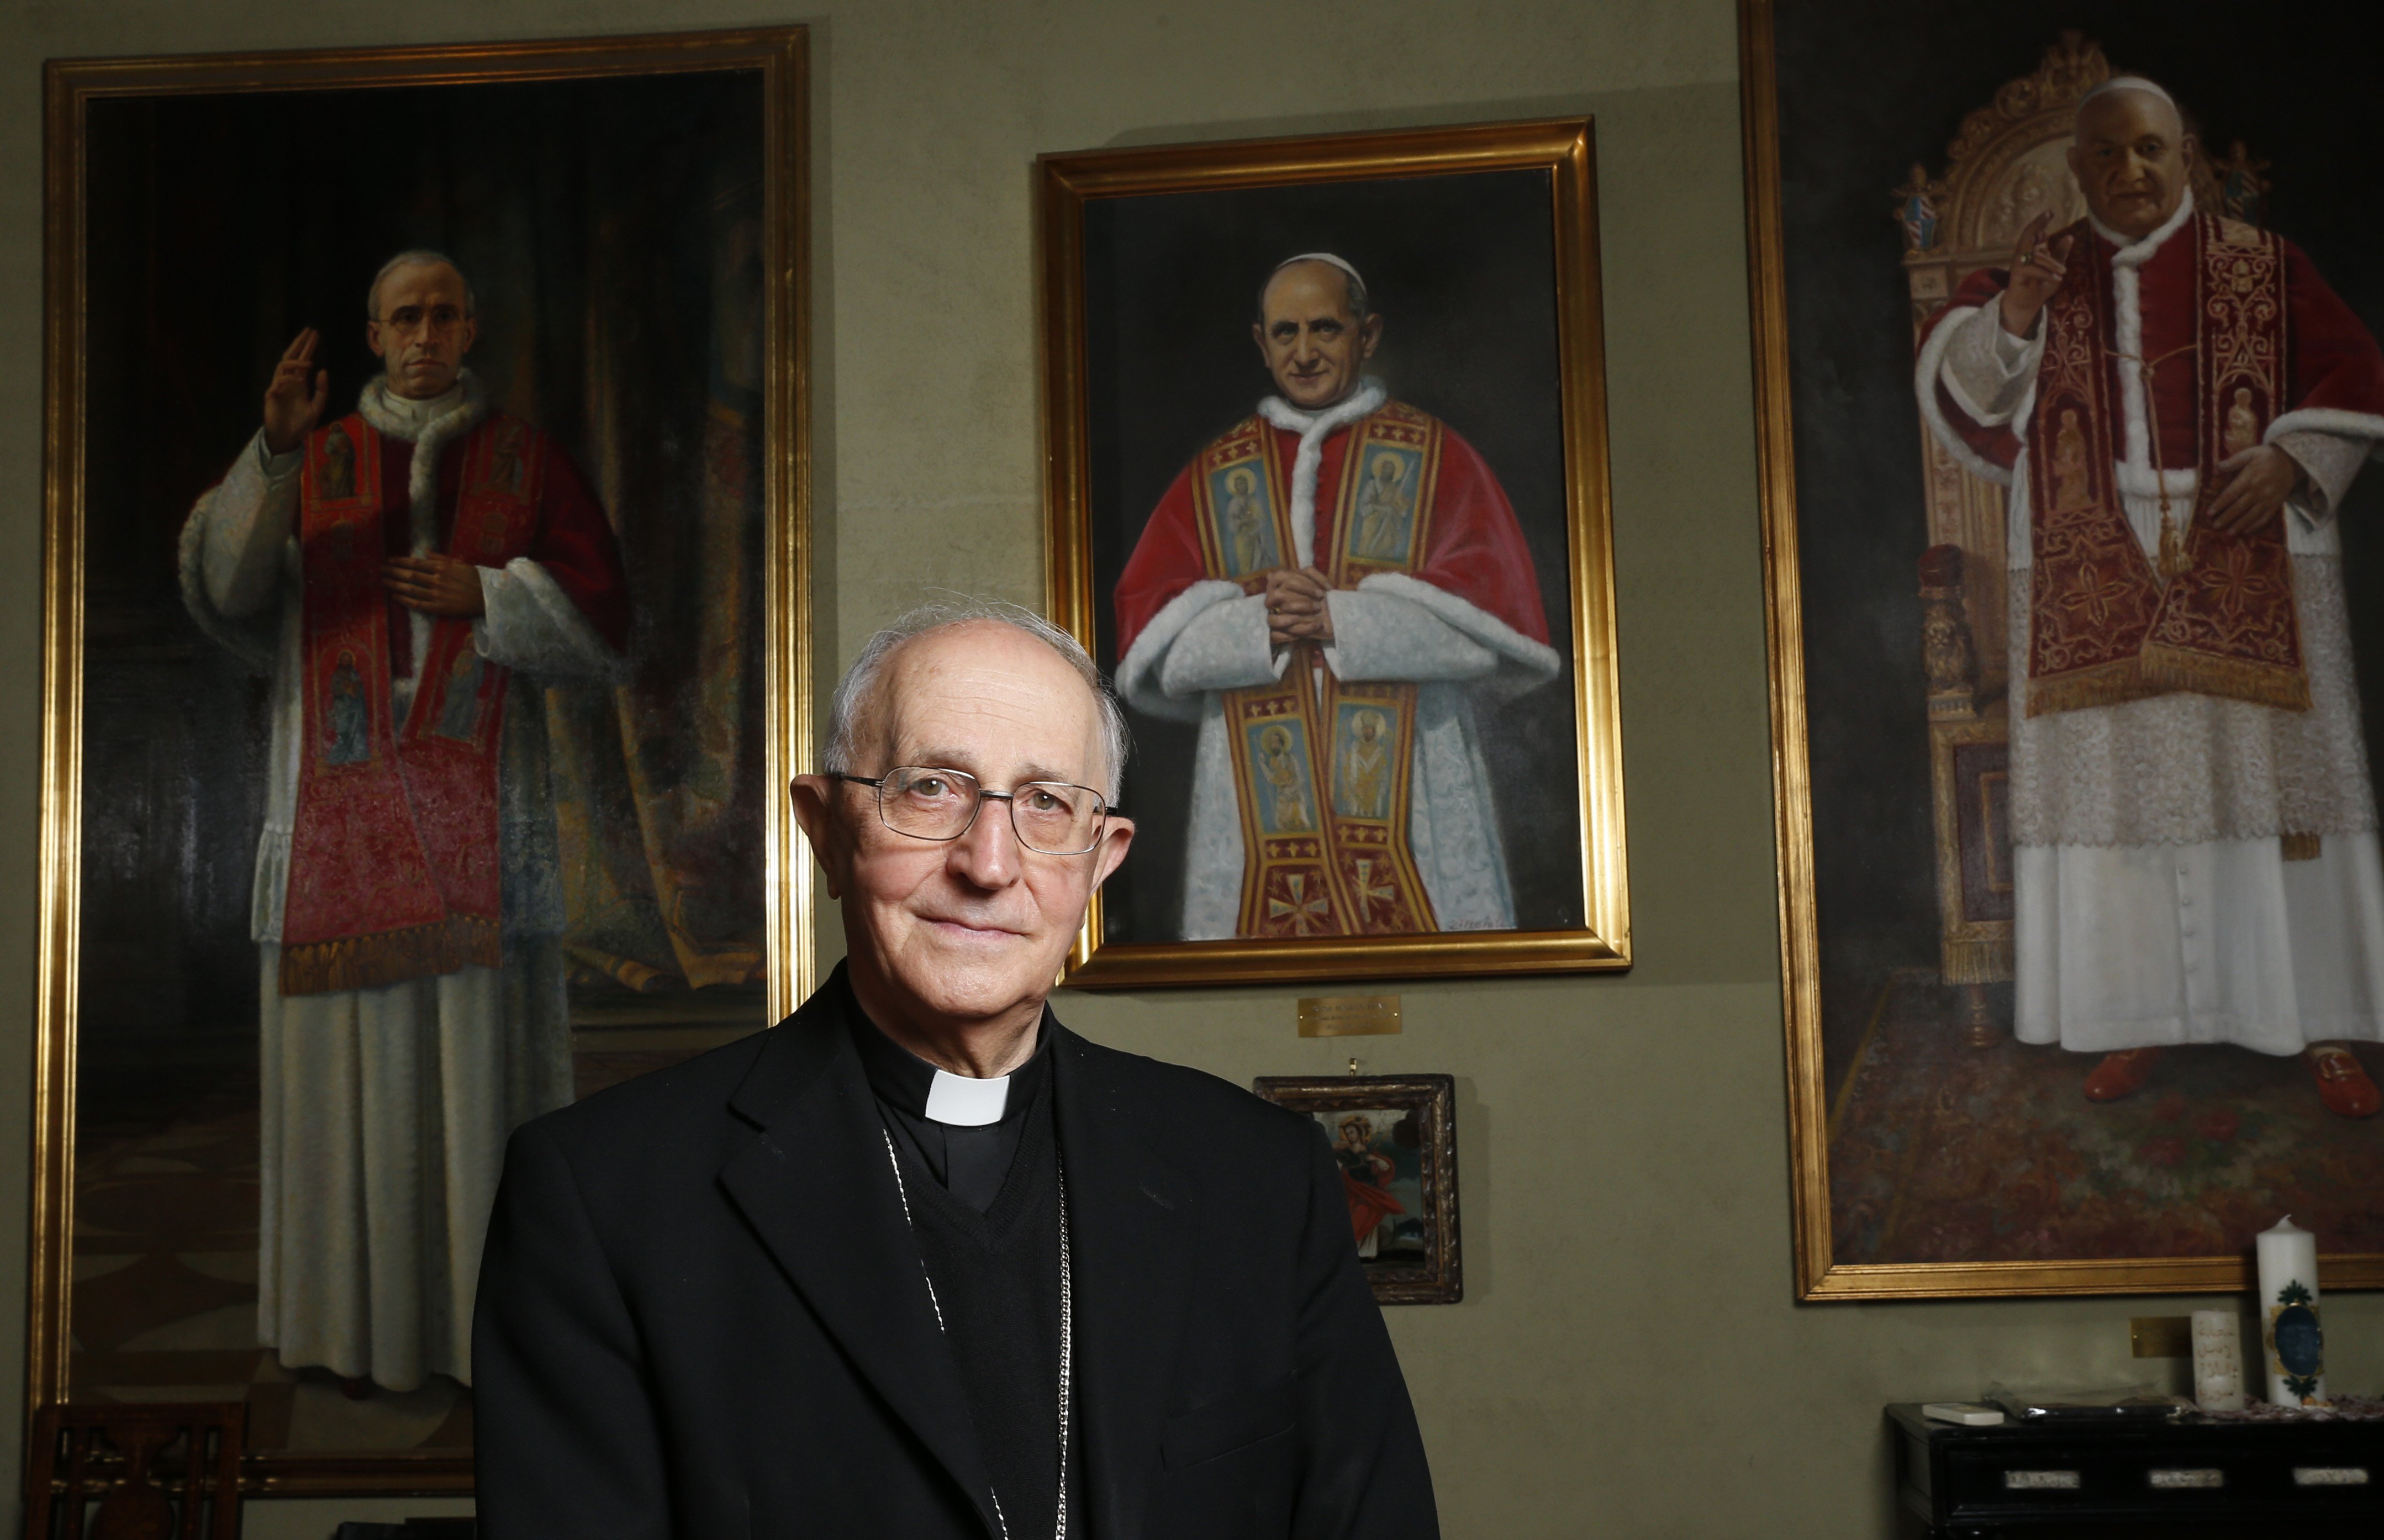 Cardinal Fernando Filoni, grand master of the Equestrian Order of the Holy Sepulchre, is pictured in his office at the order's headquarters in Rome in this April 30, 202. (CNS photo/Paul Haring)